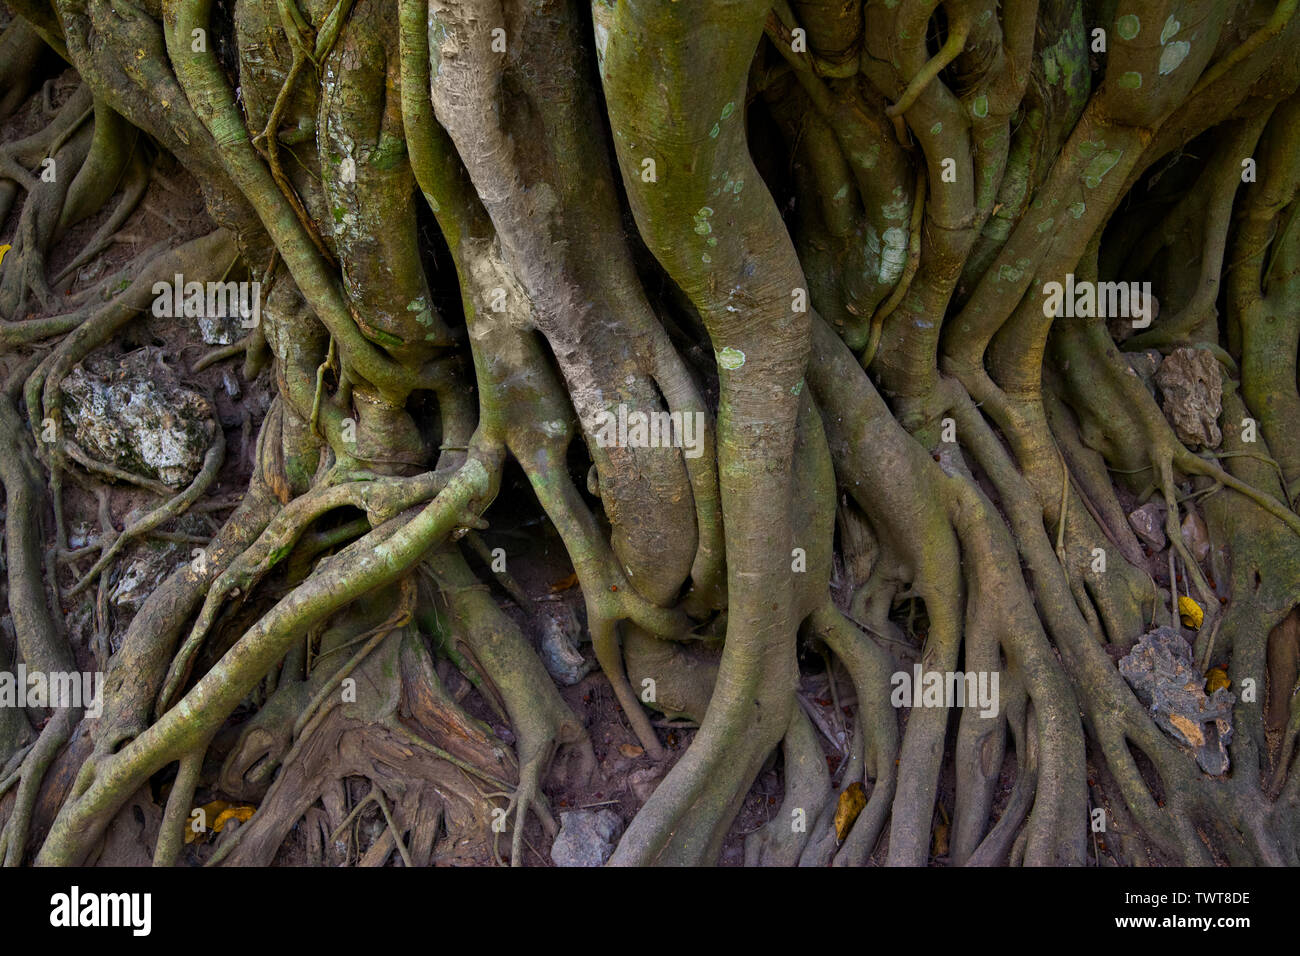 Twined gaint roots of tree, Cambodia Stock Photo